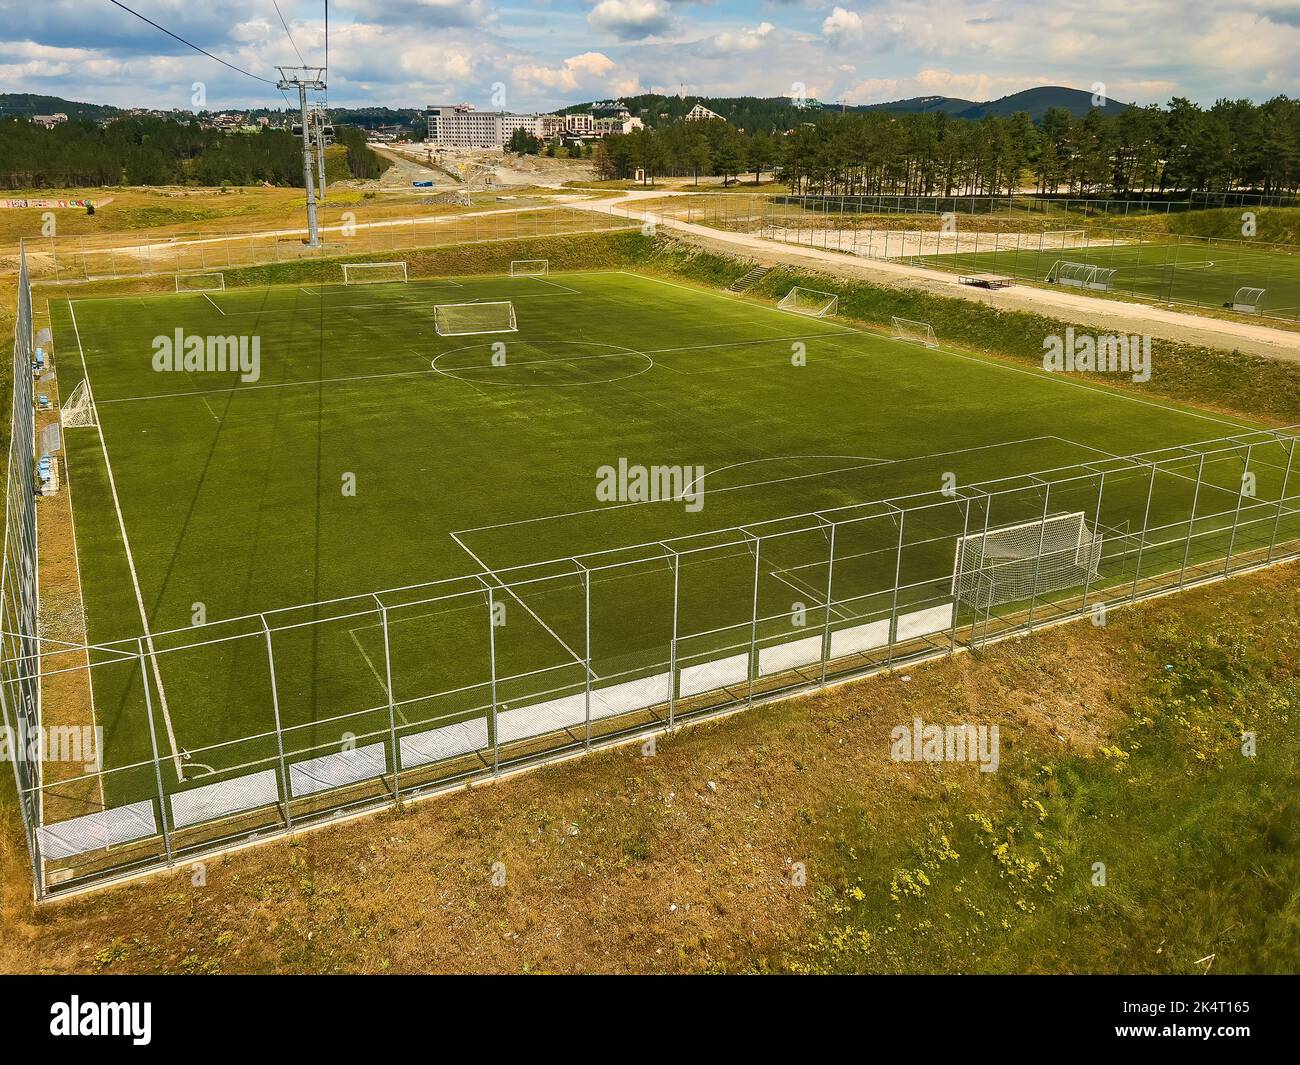 Aerial view of soccer field with goals for sport practice and training, high angle view Stock Photo